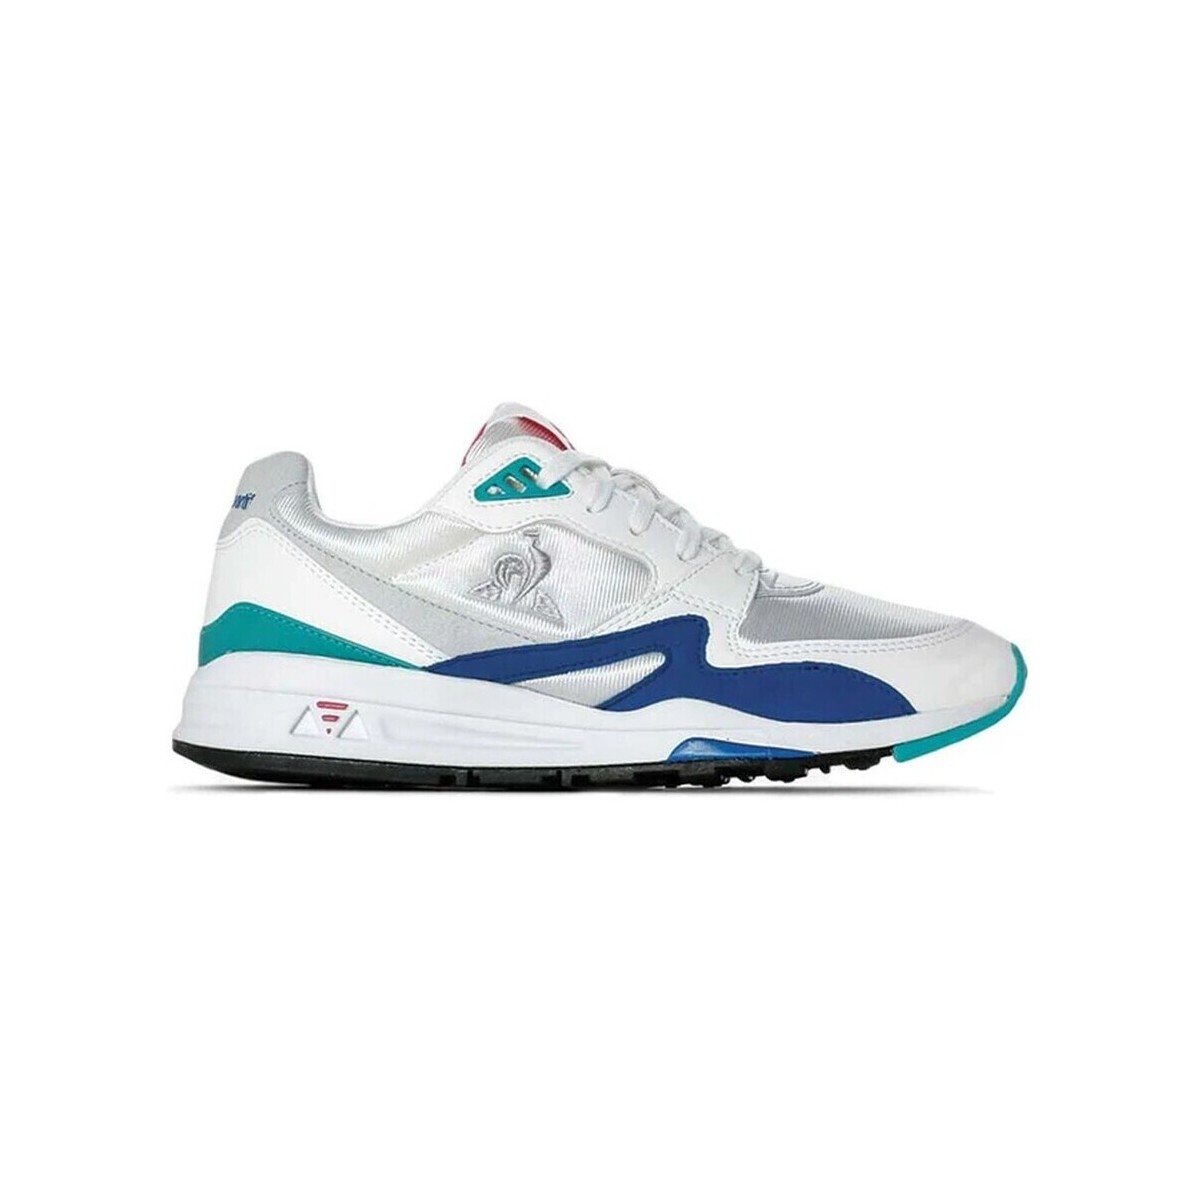 Chaussures sweet Running / trail Le Coq Sportif Lcs R1100 Blanc